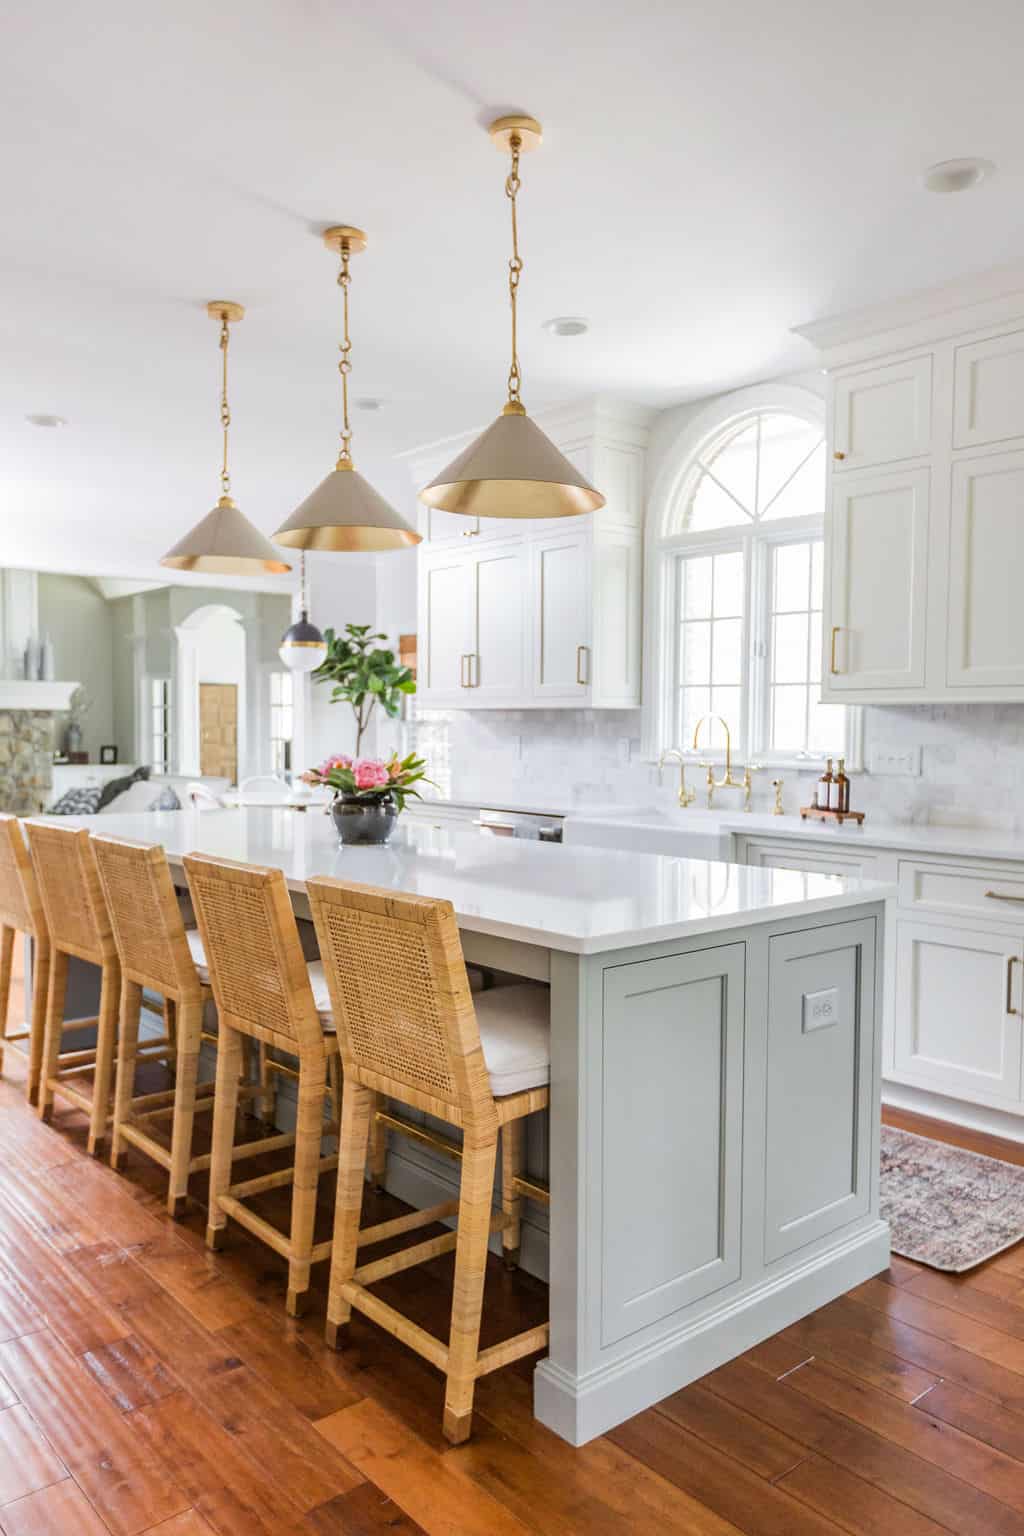 Nicholas Design Build | A white kitchen with wooden floors and stools underwent a remodel.